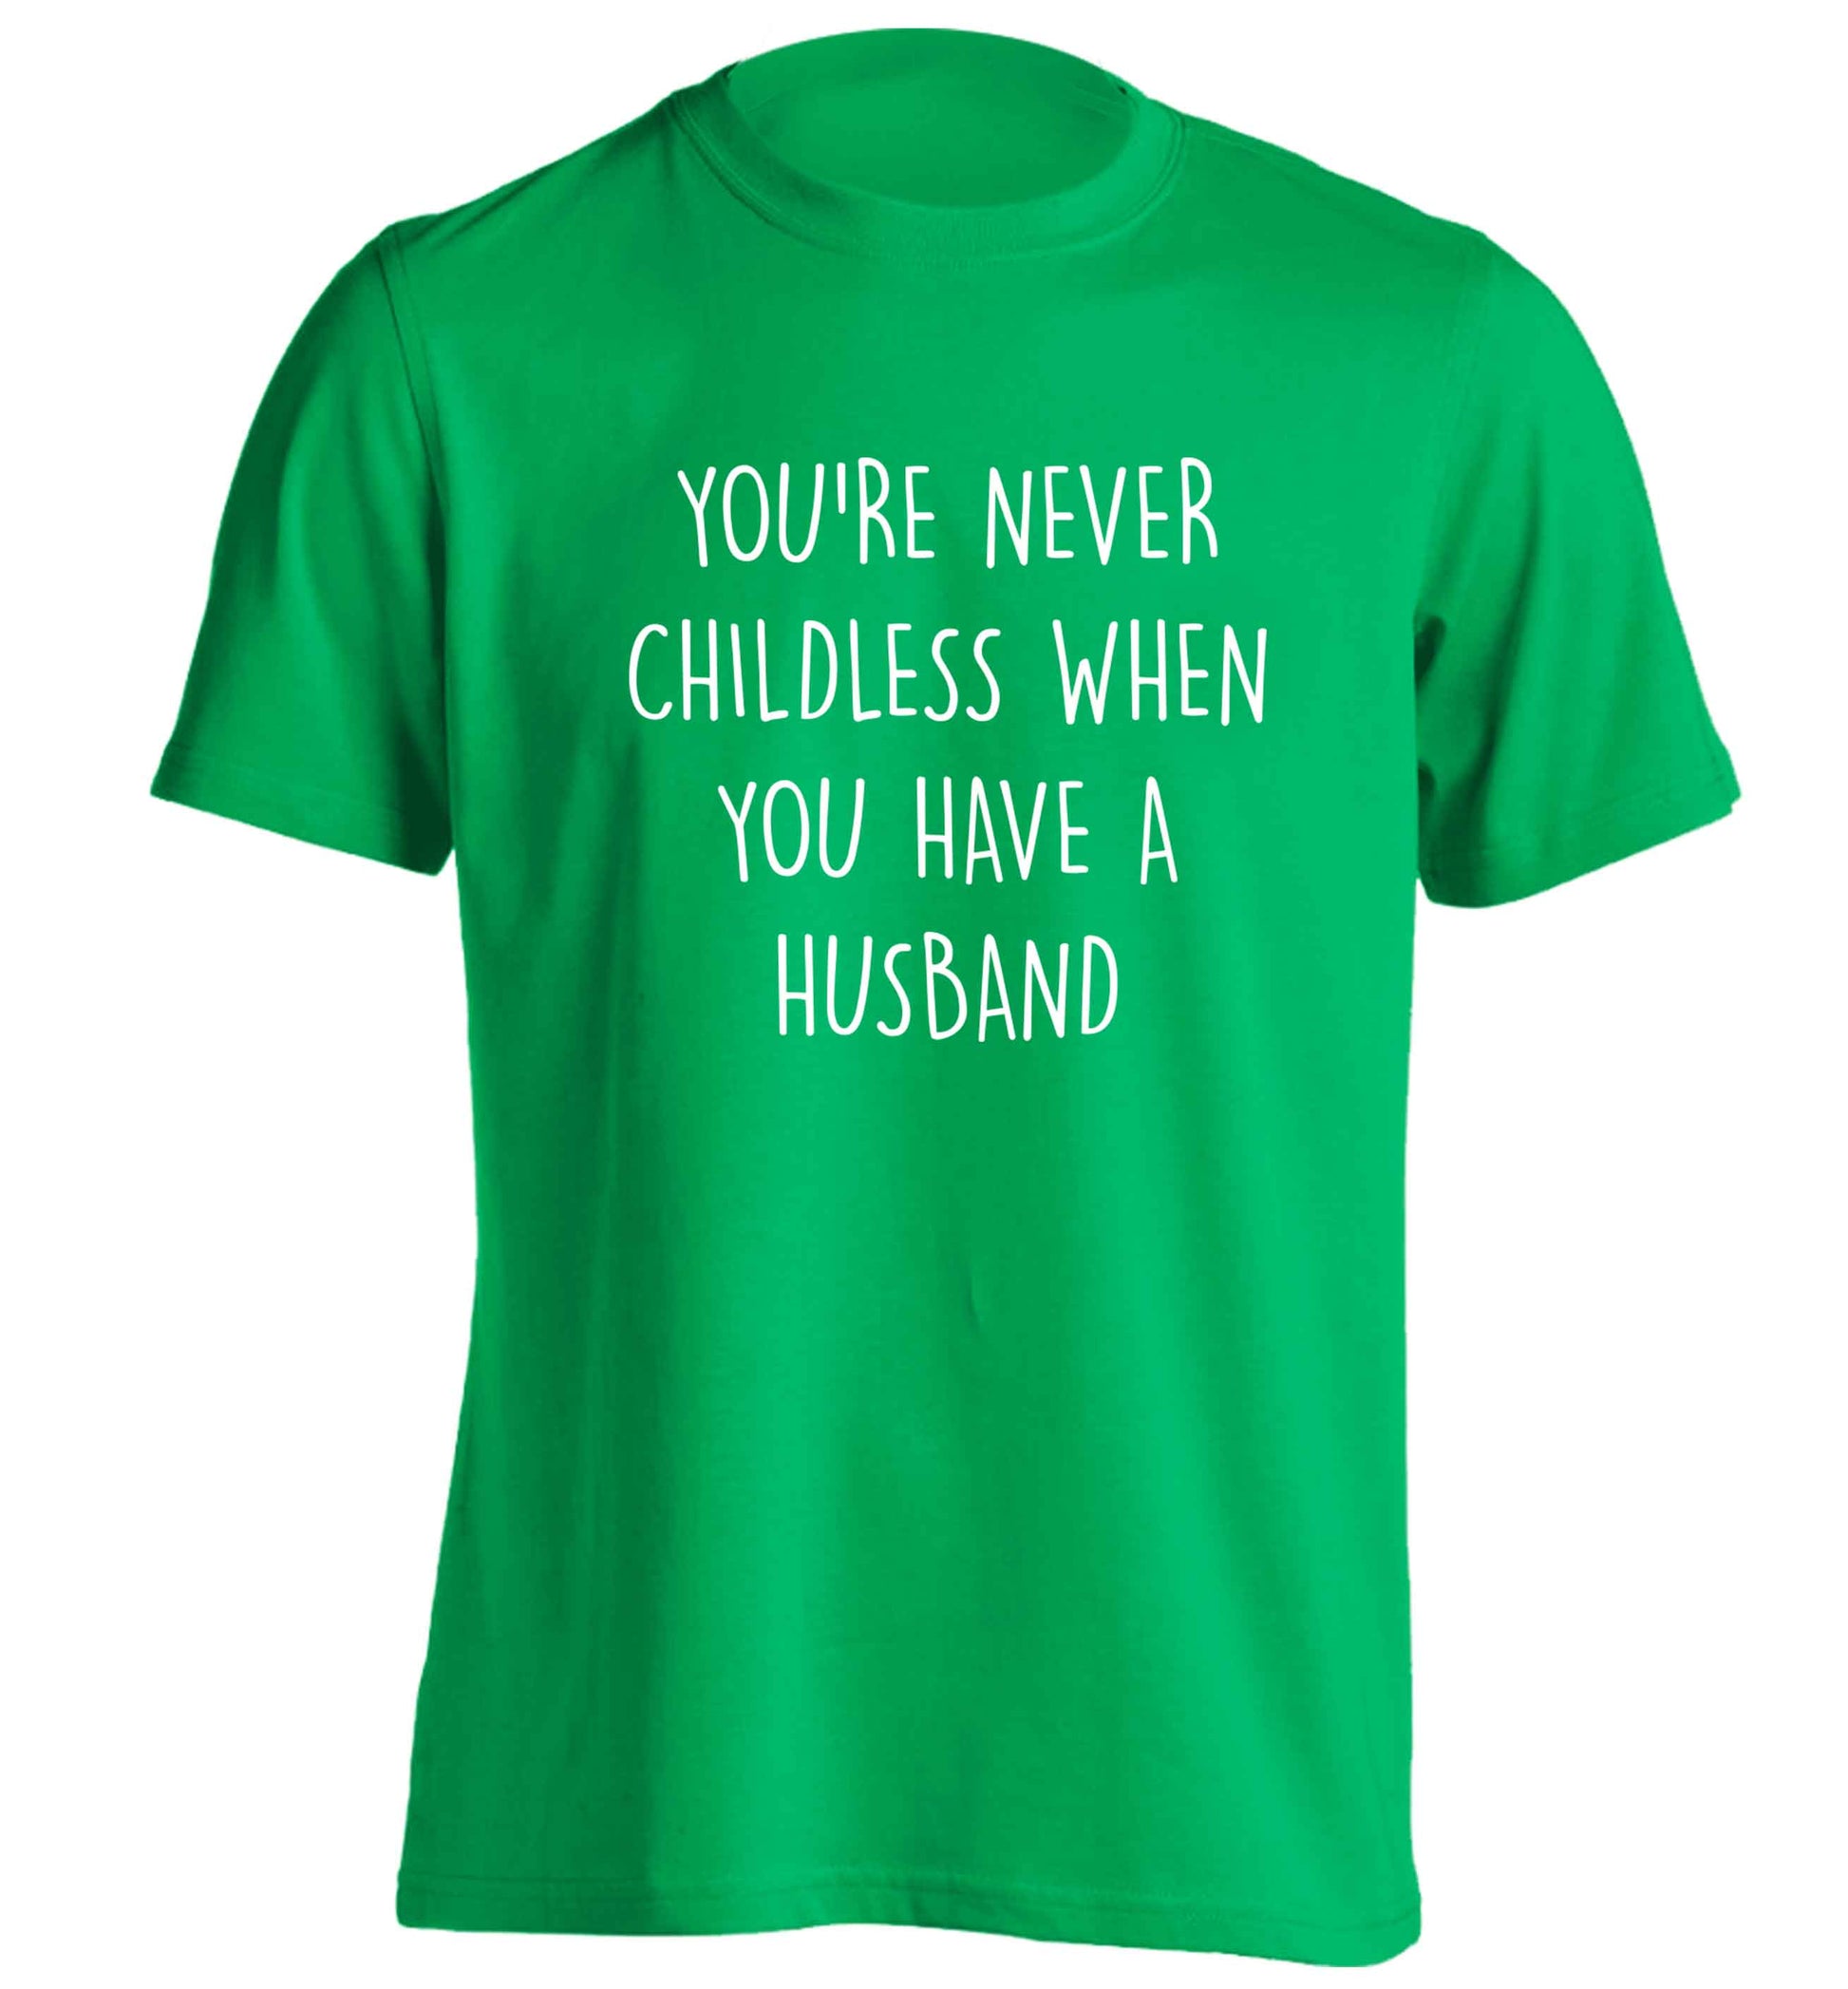 You're never childess when you have a husband adults unisex green Tshirt 2XL